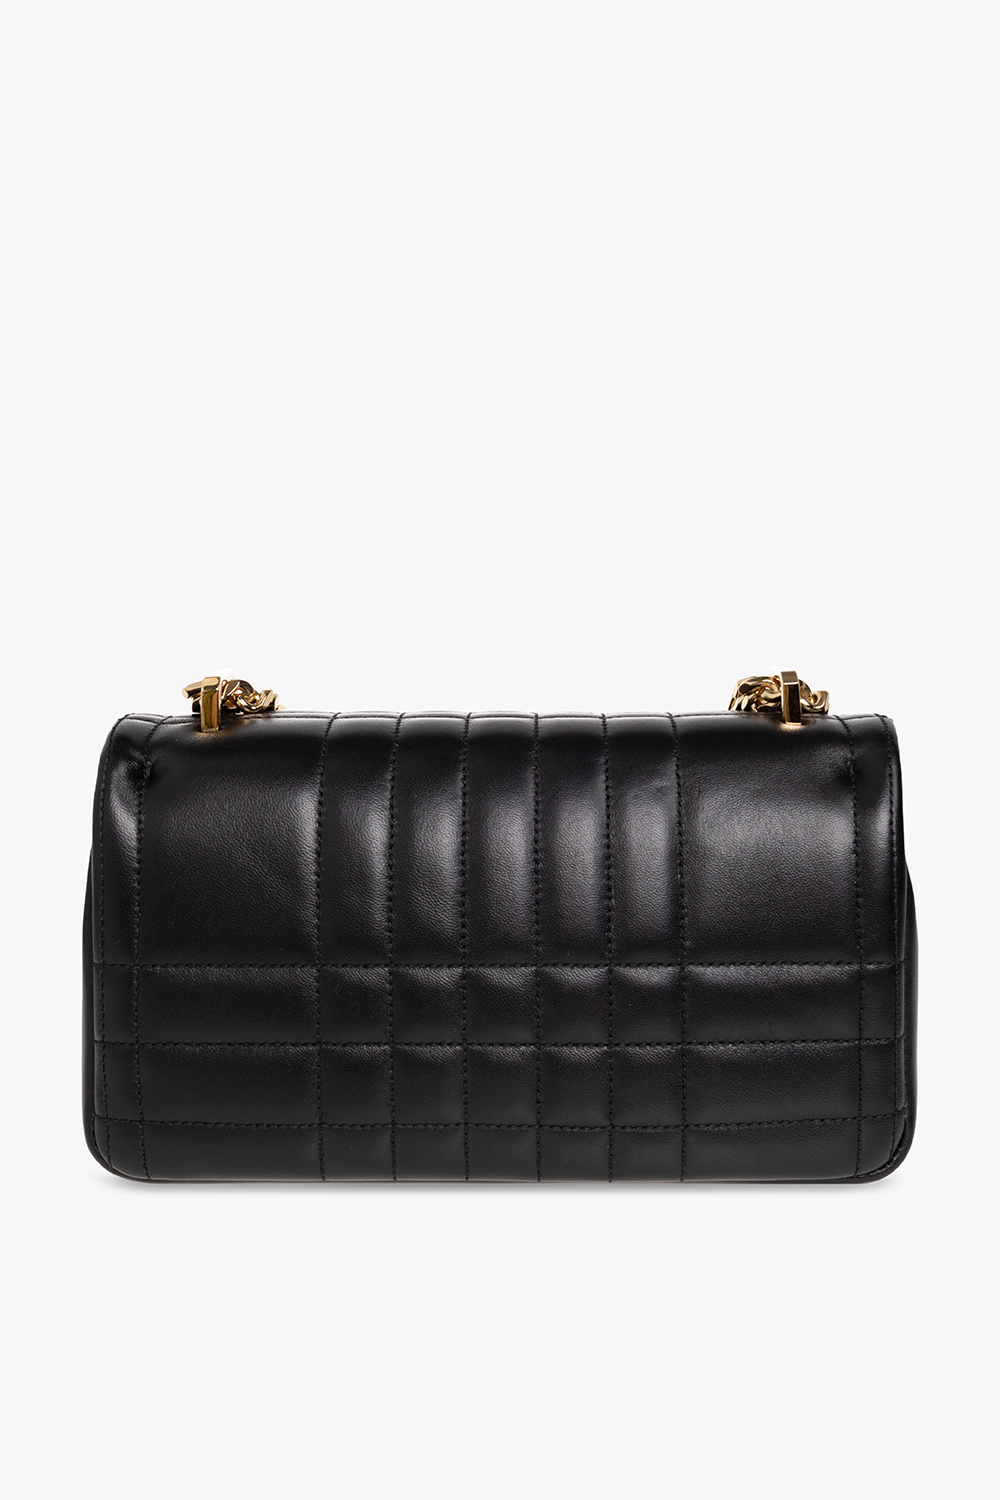 Burberry ‘Lola Small’ quilted shoulder bag